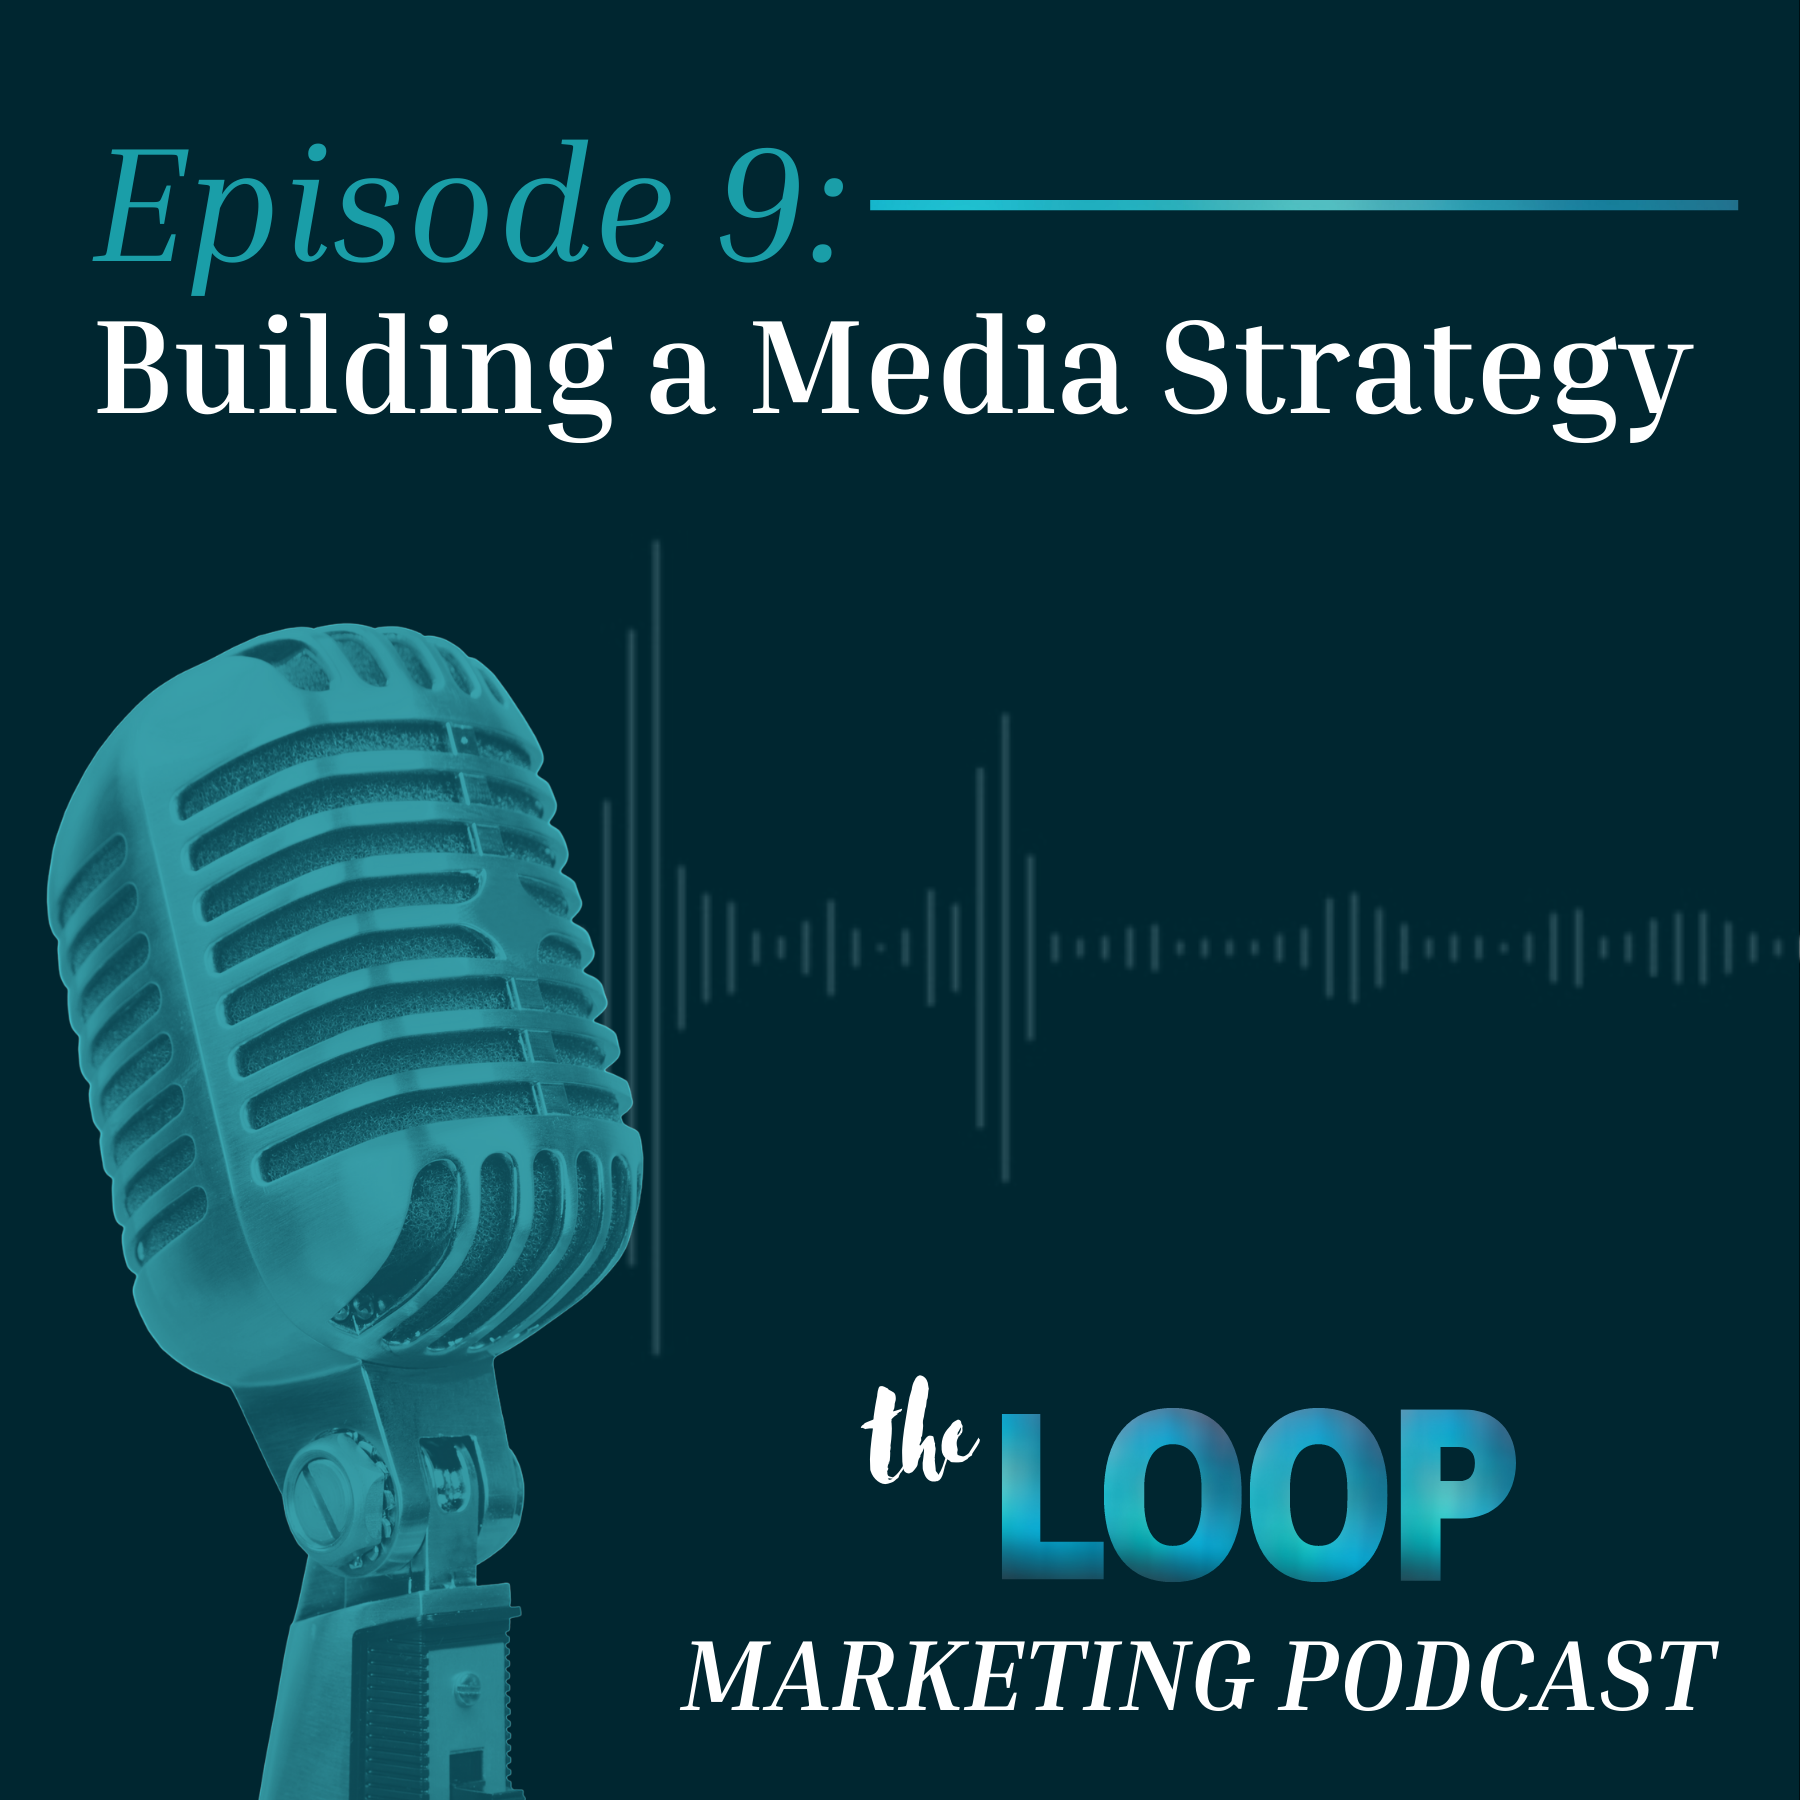 Building a Media Strategy